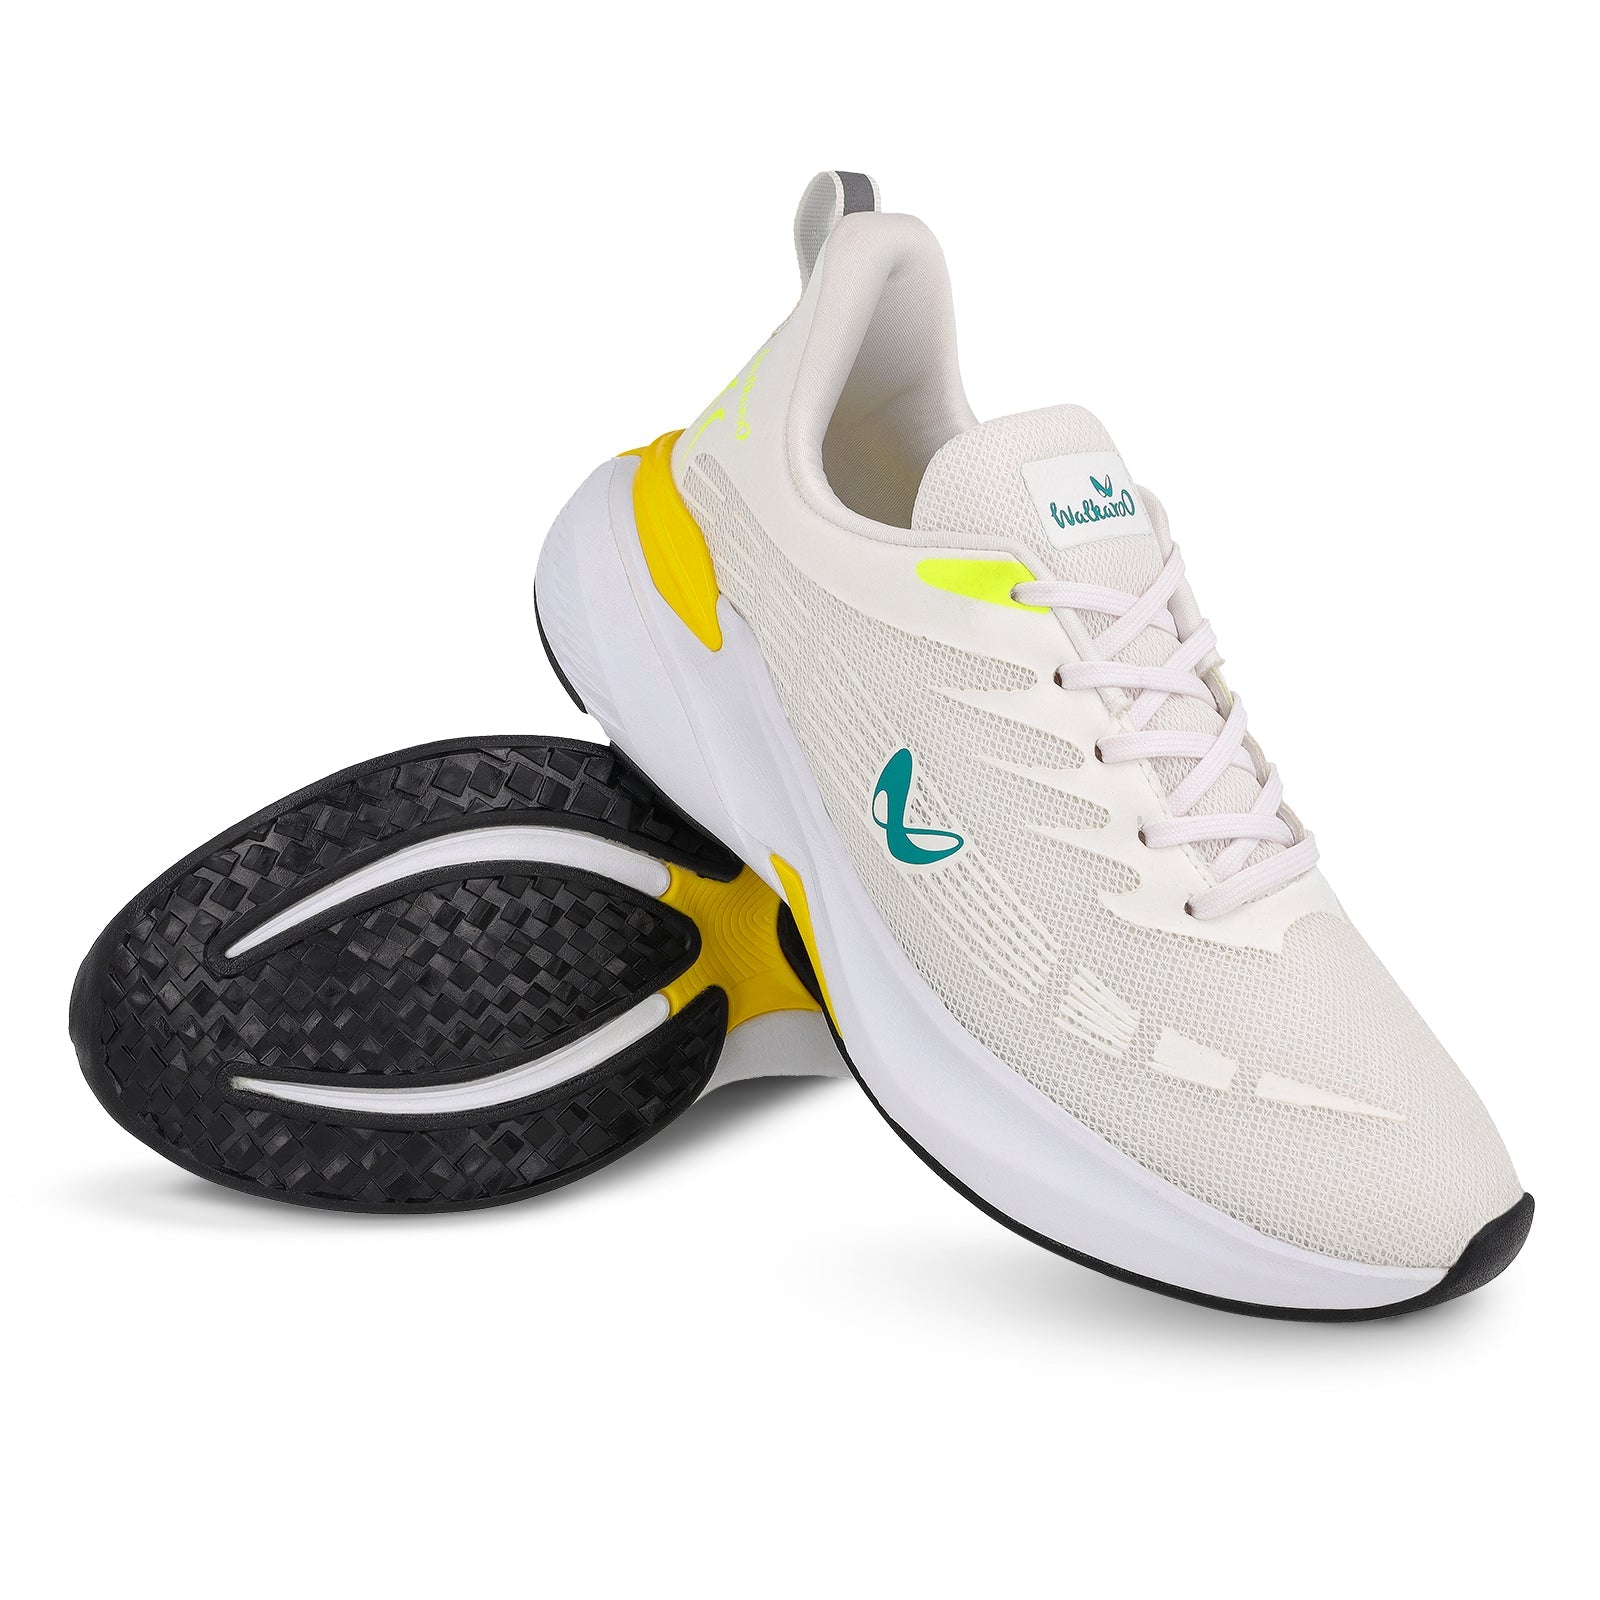 WALKAROO Training & Gym Shoes For Men - Price History